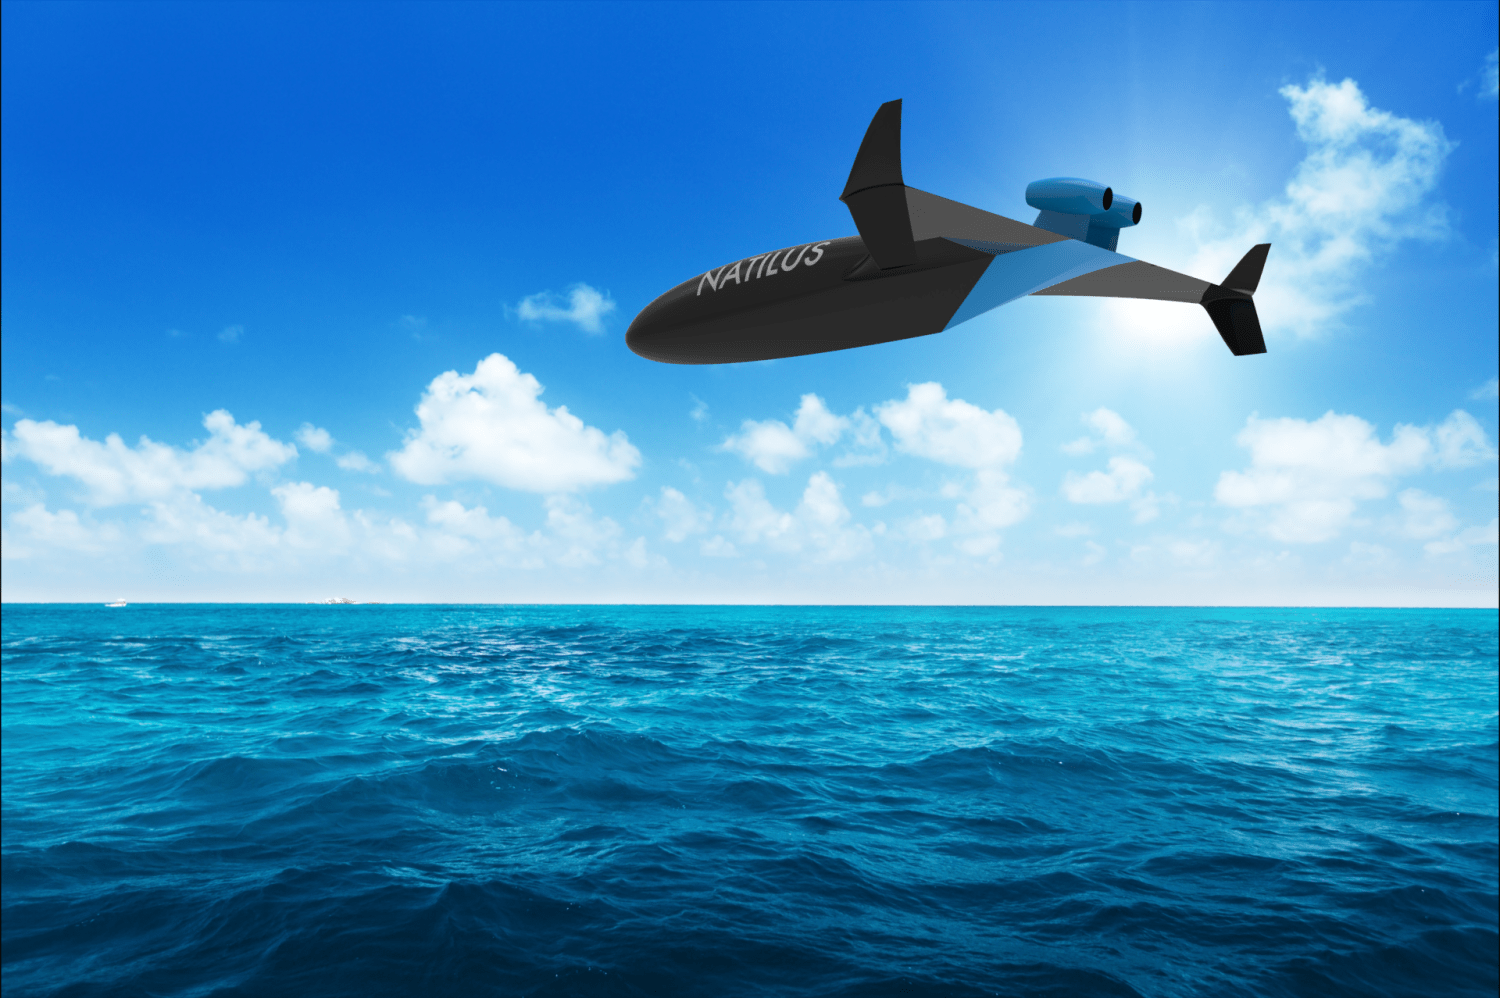 These Giant Drones Could Seriously Disrupt The Shipping Industry